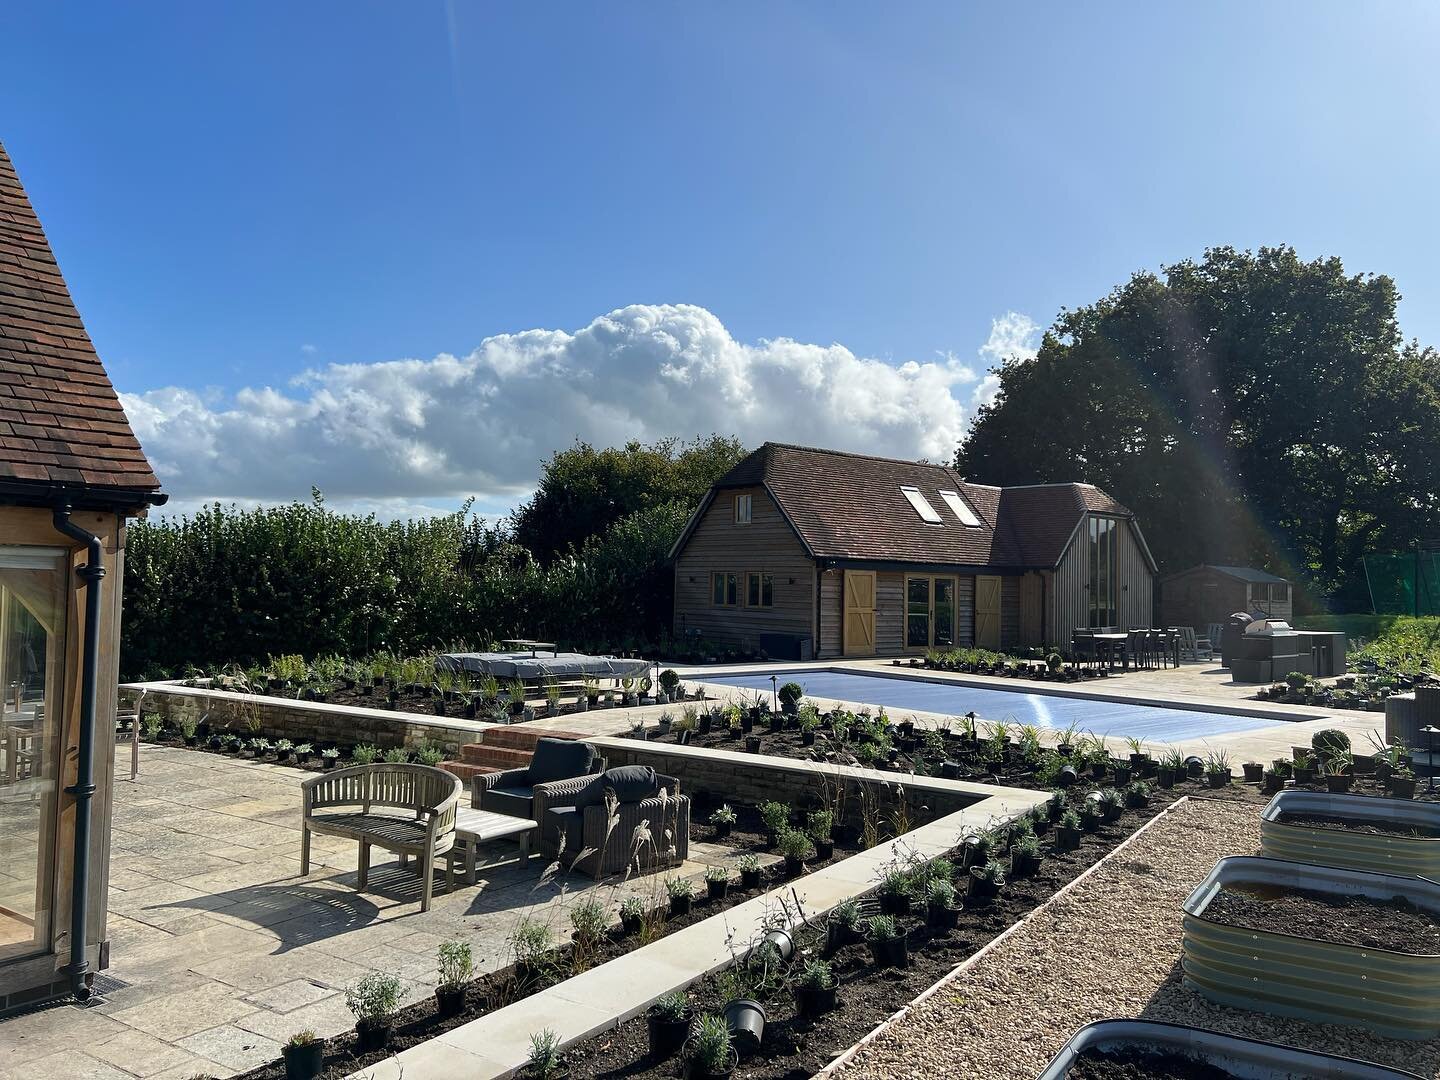 Setting out in the ☀️. Hedging and trees to come. Lovely day for it. Wouldn&rsquo;t mind a dip in that pool! #gardendesign #dorsetgardens #gardendesignerdorset #plantsmakepeoplehappy #plantingplans #gardendesigndorset